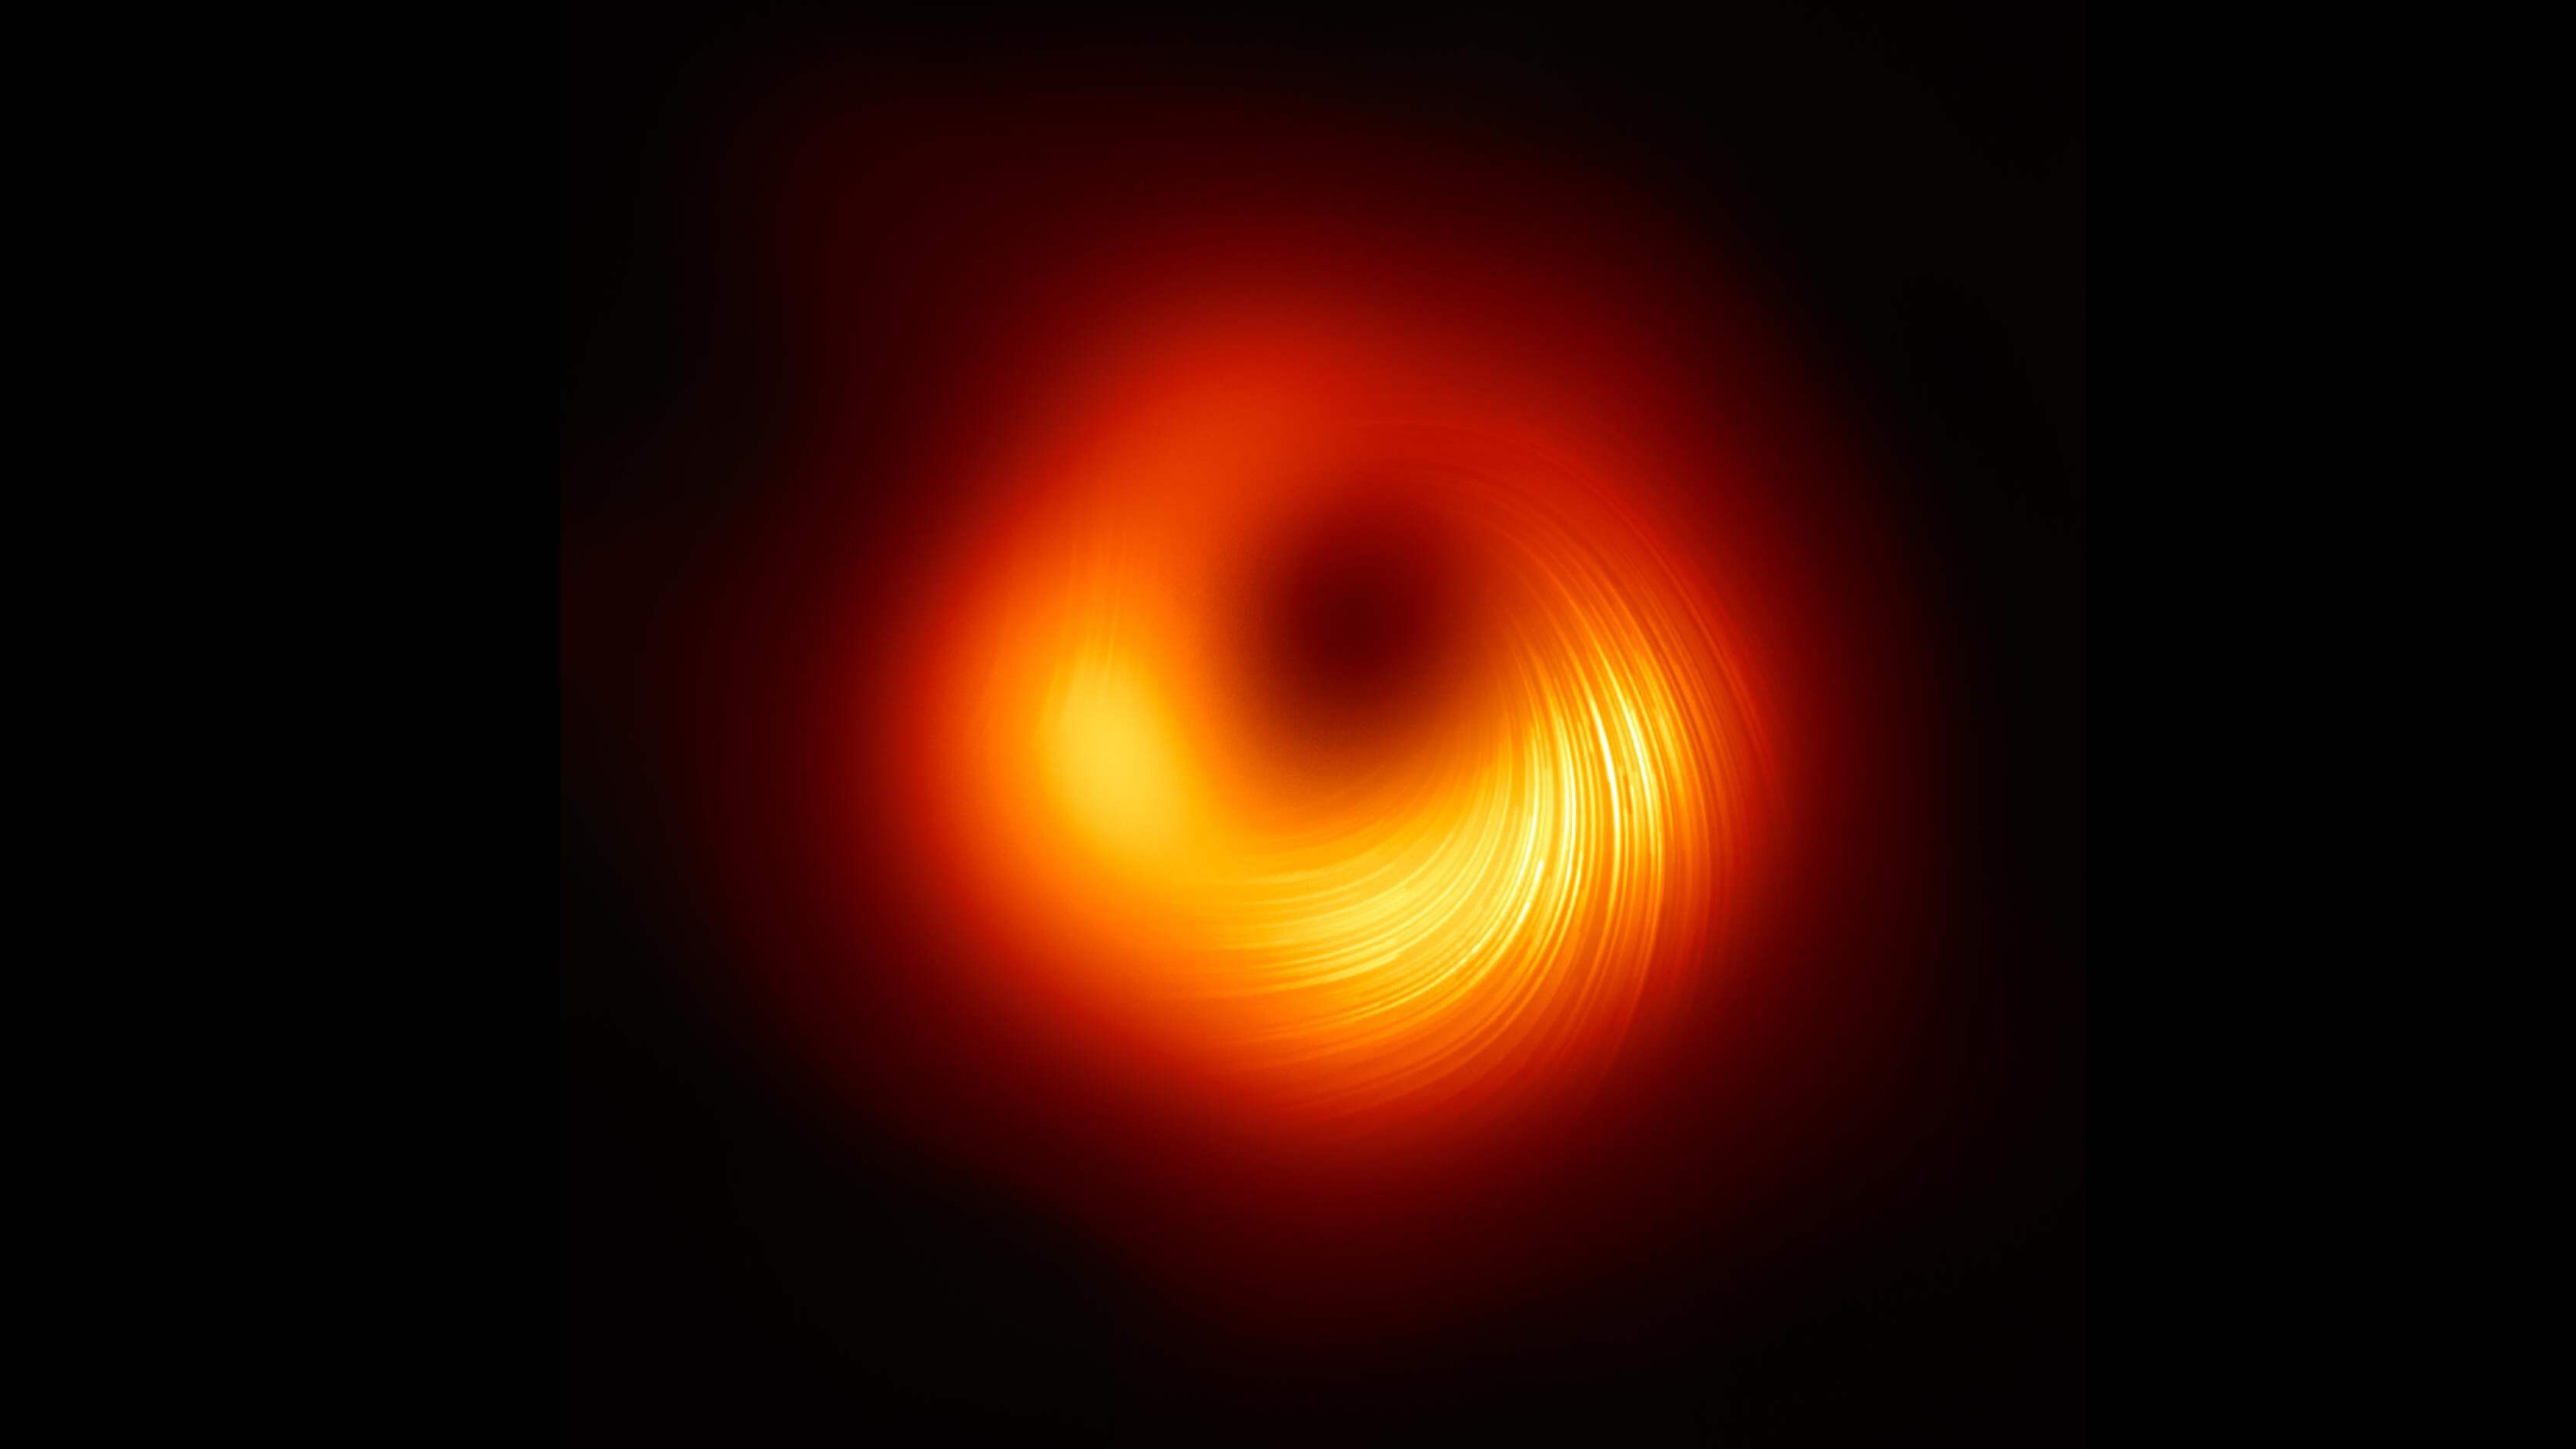 a fuzzy donut shape with a dark center and blurry orange ring.